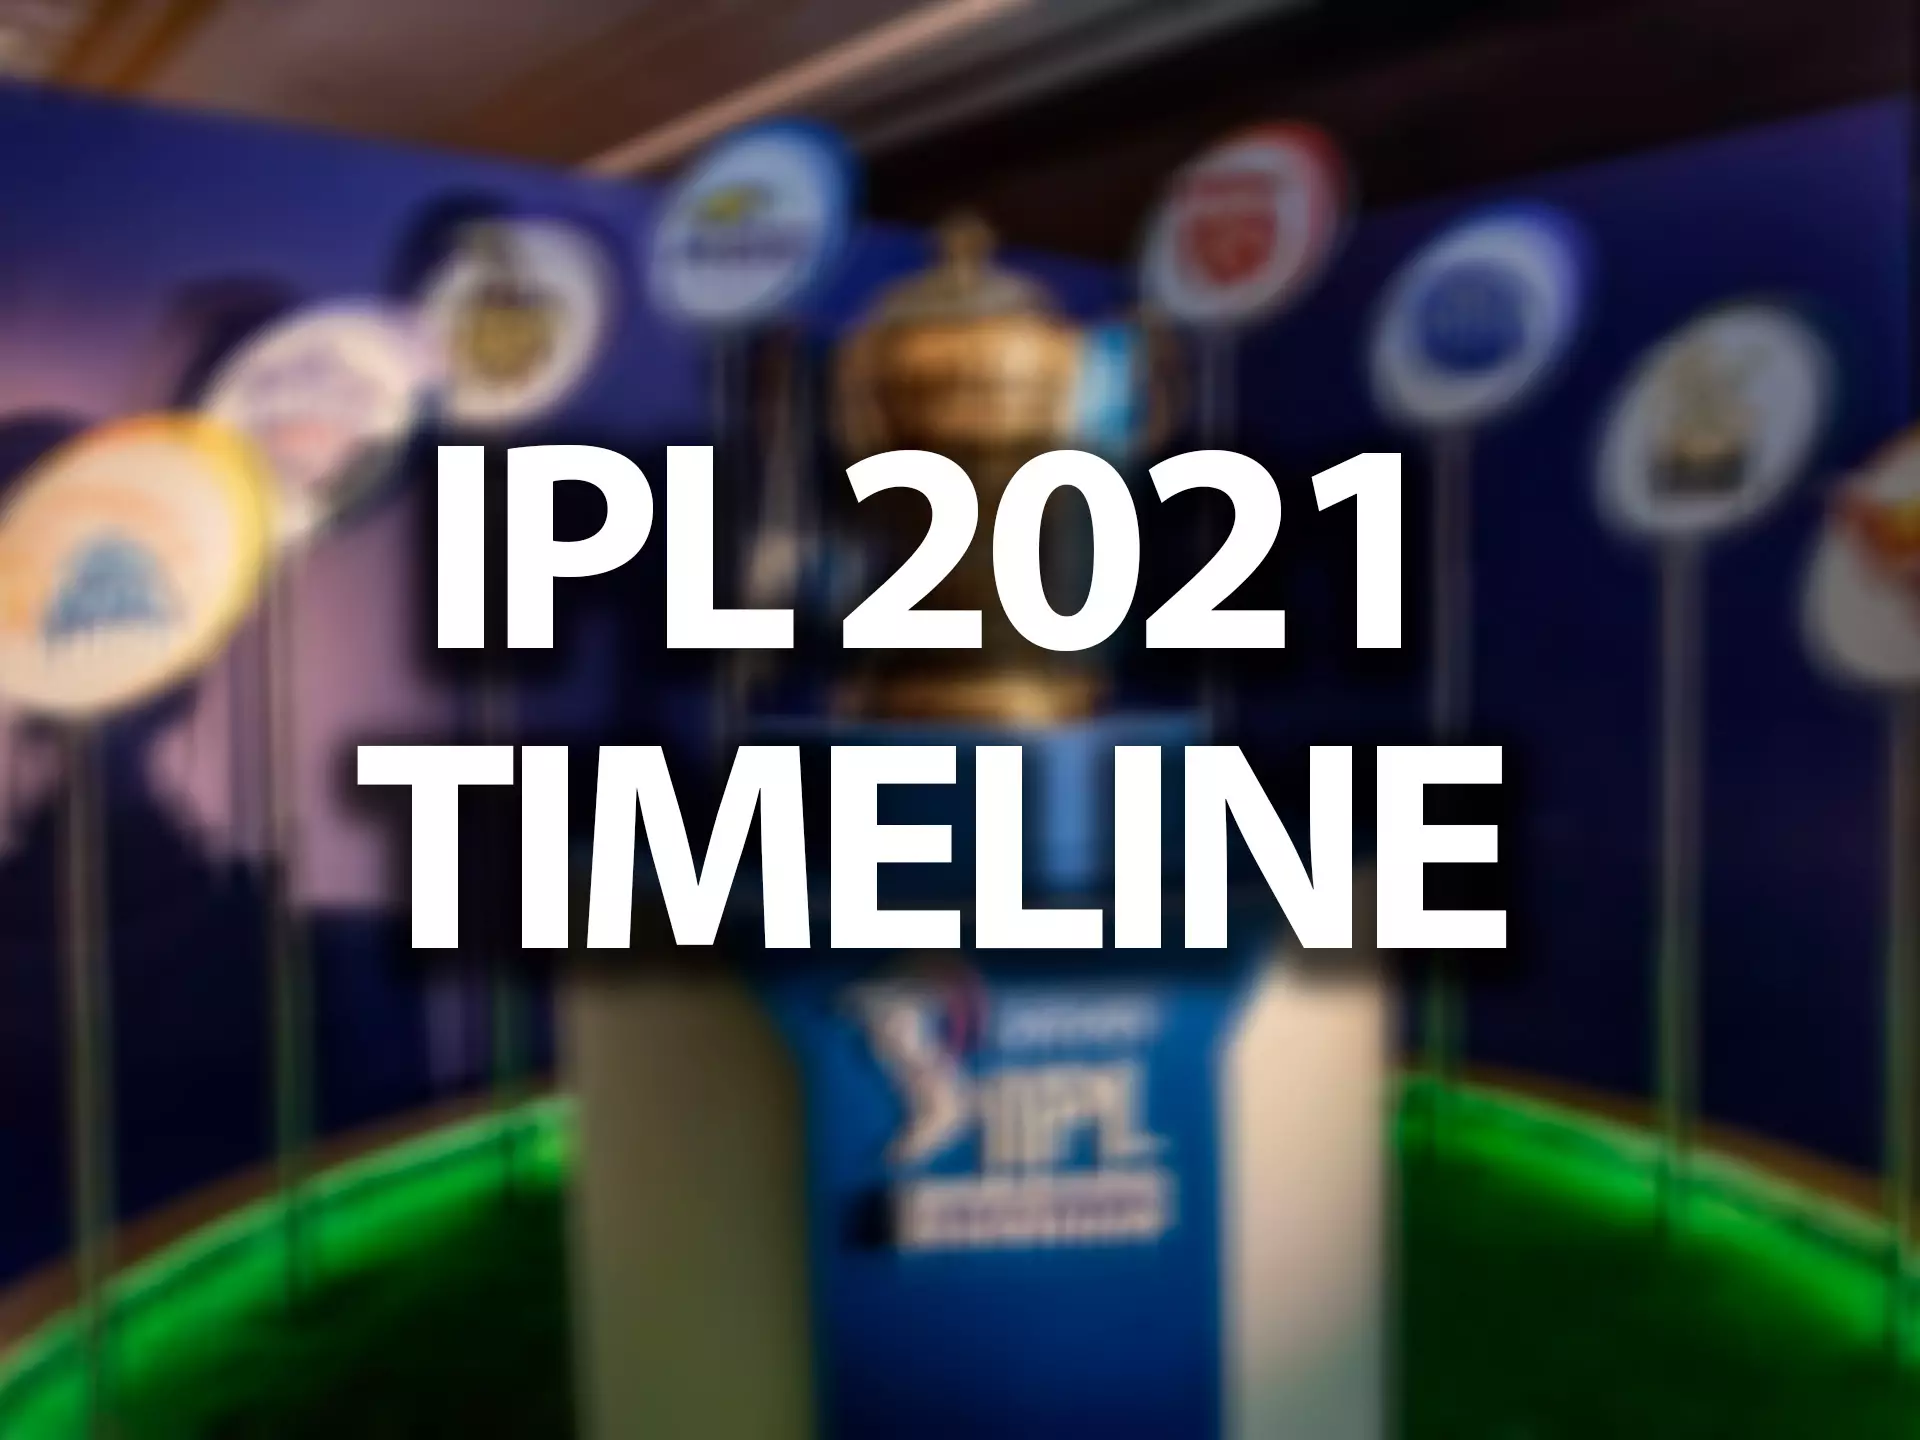 Follow the IPL schedule to bet on your fvorite cricket teams.